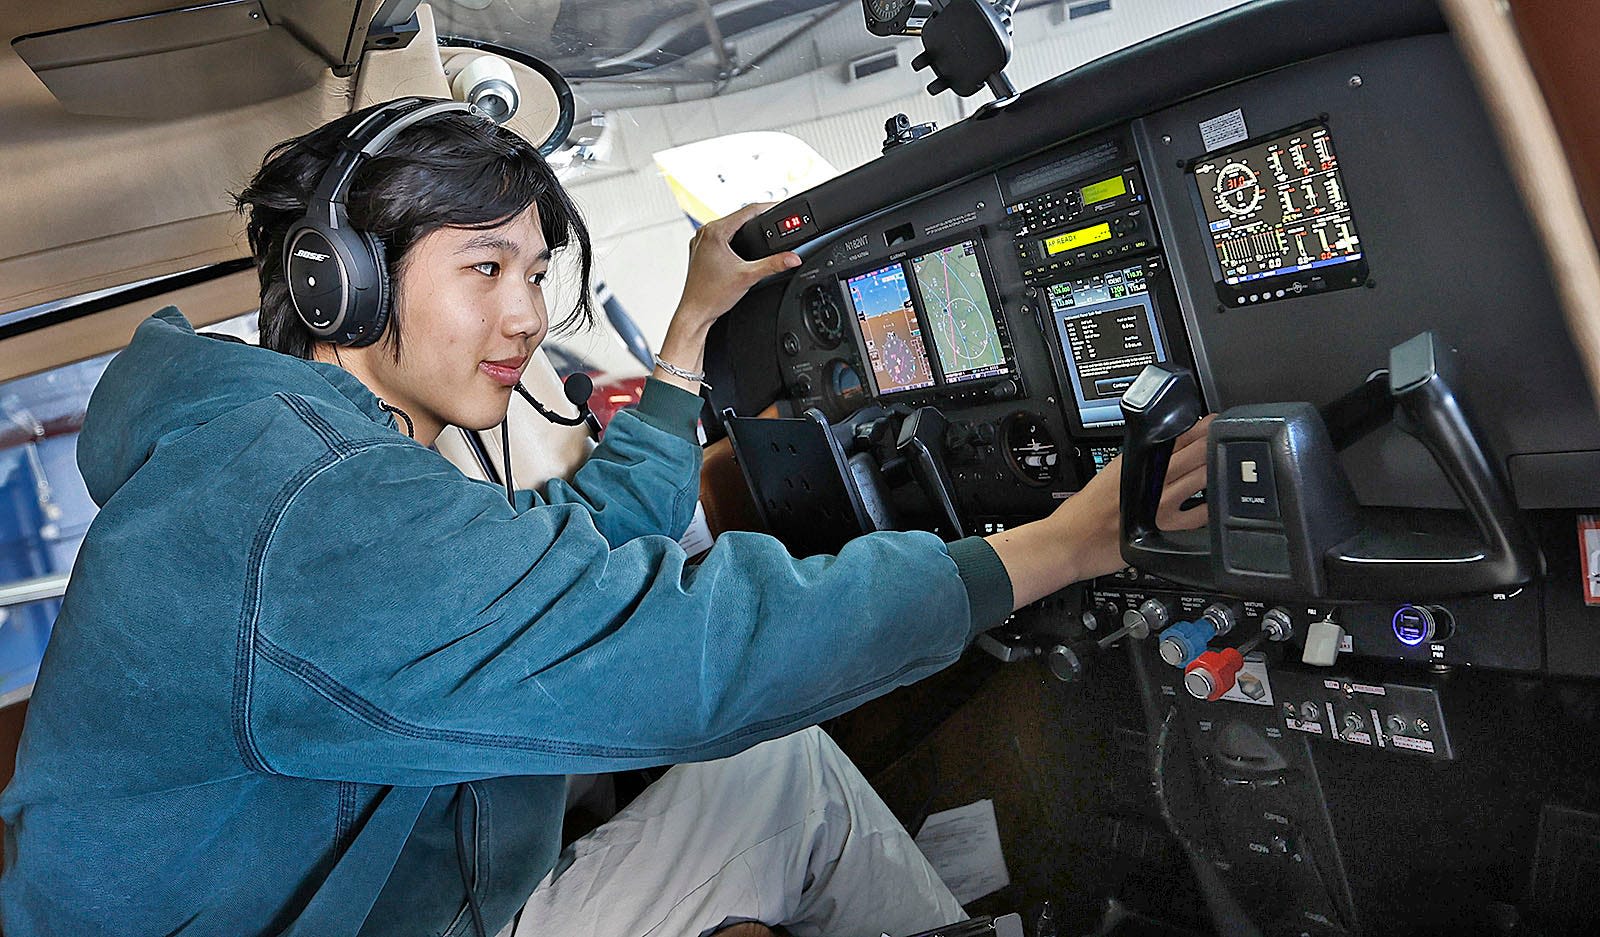 Massachusetts native, 18, plans to fly around world − by himself